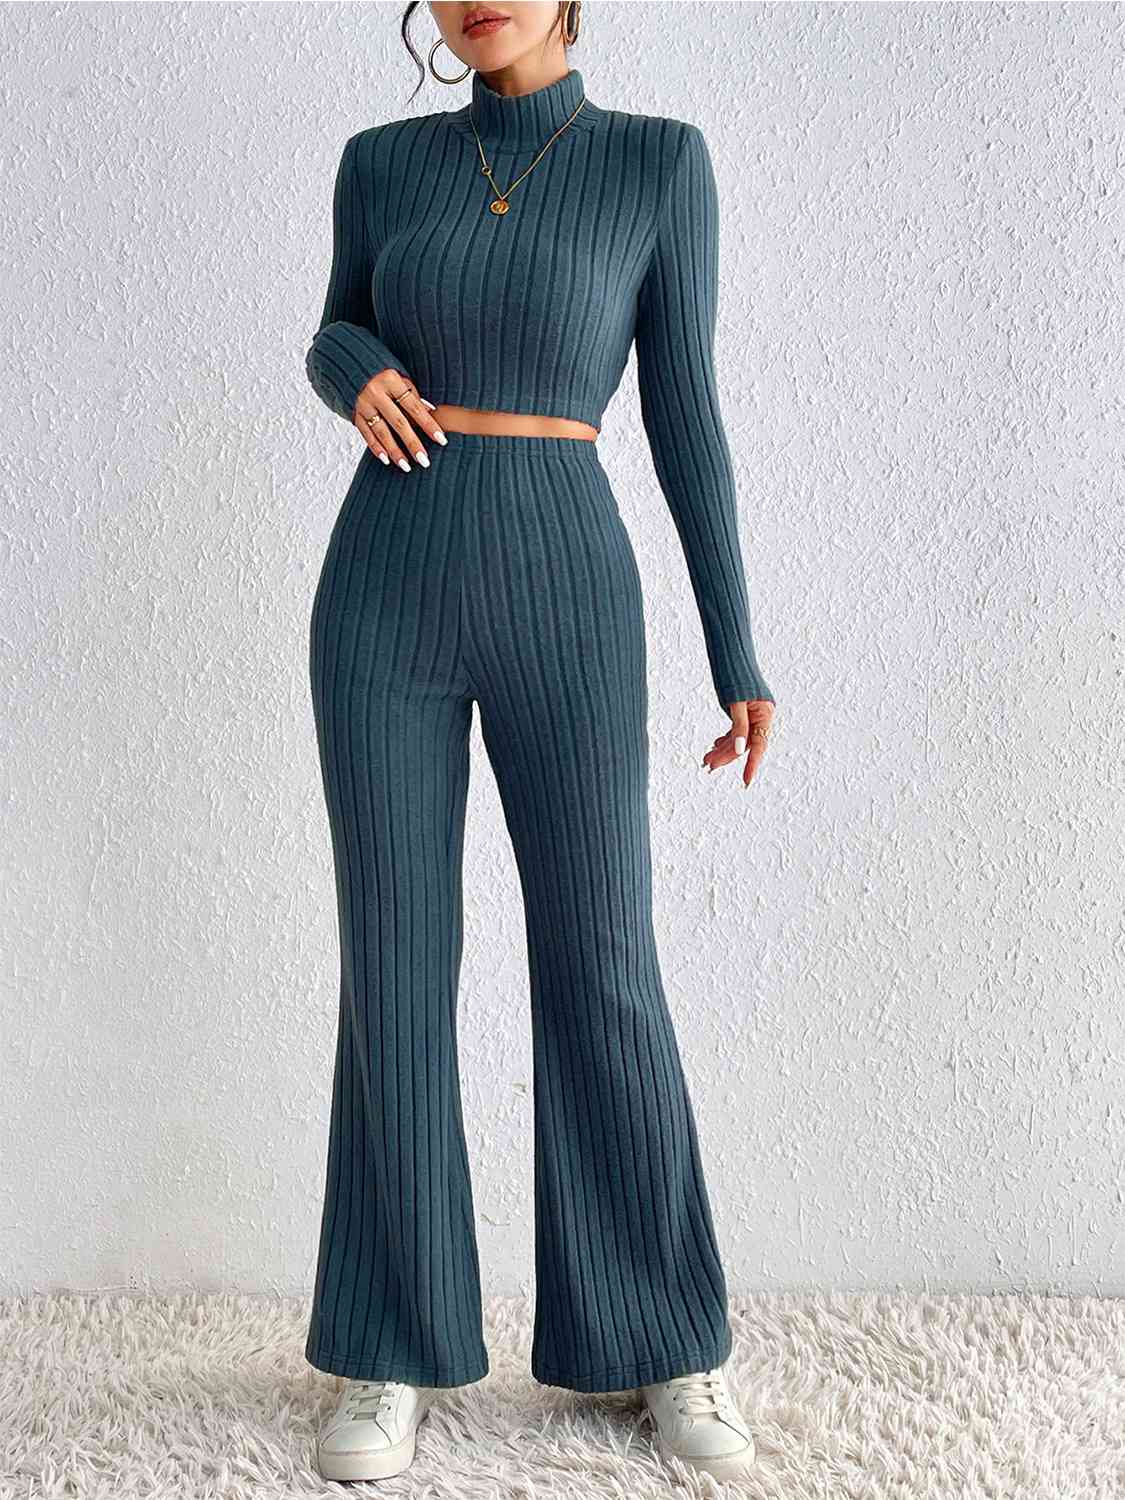 Ribbed Mock Neck Cropped Sweater & High Waist Pants Set Print on any thing USA/STOD clothes